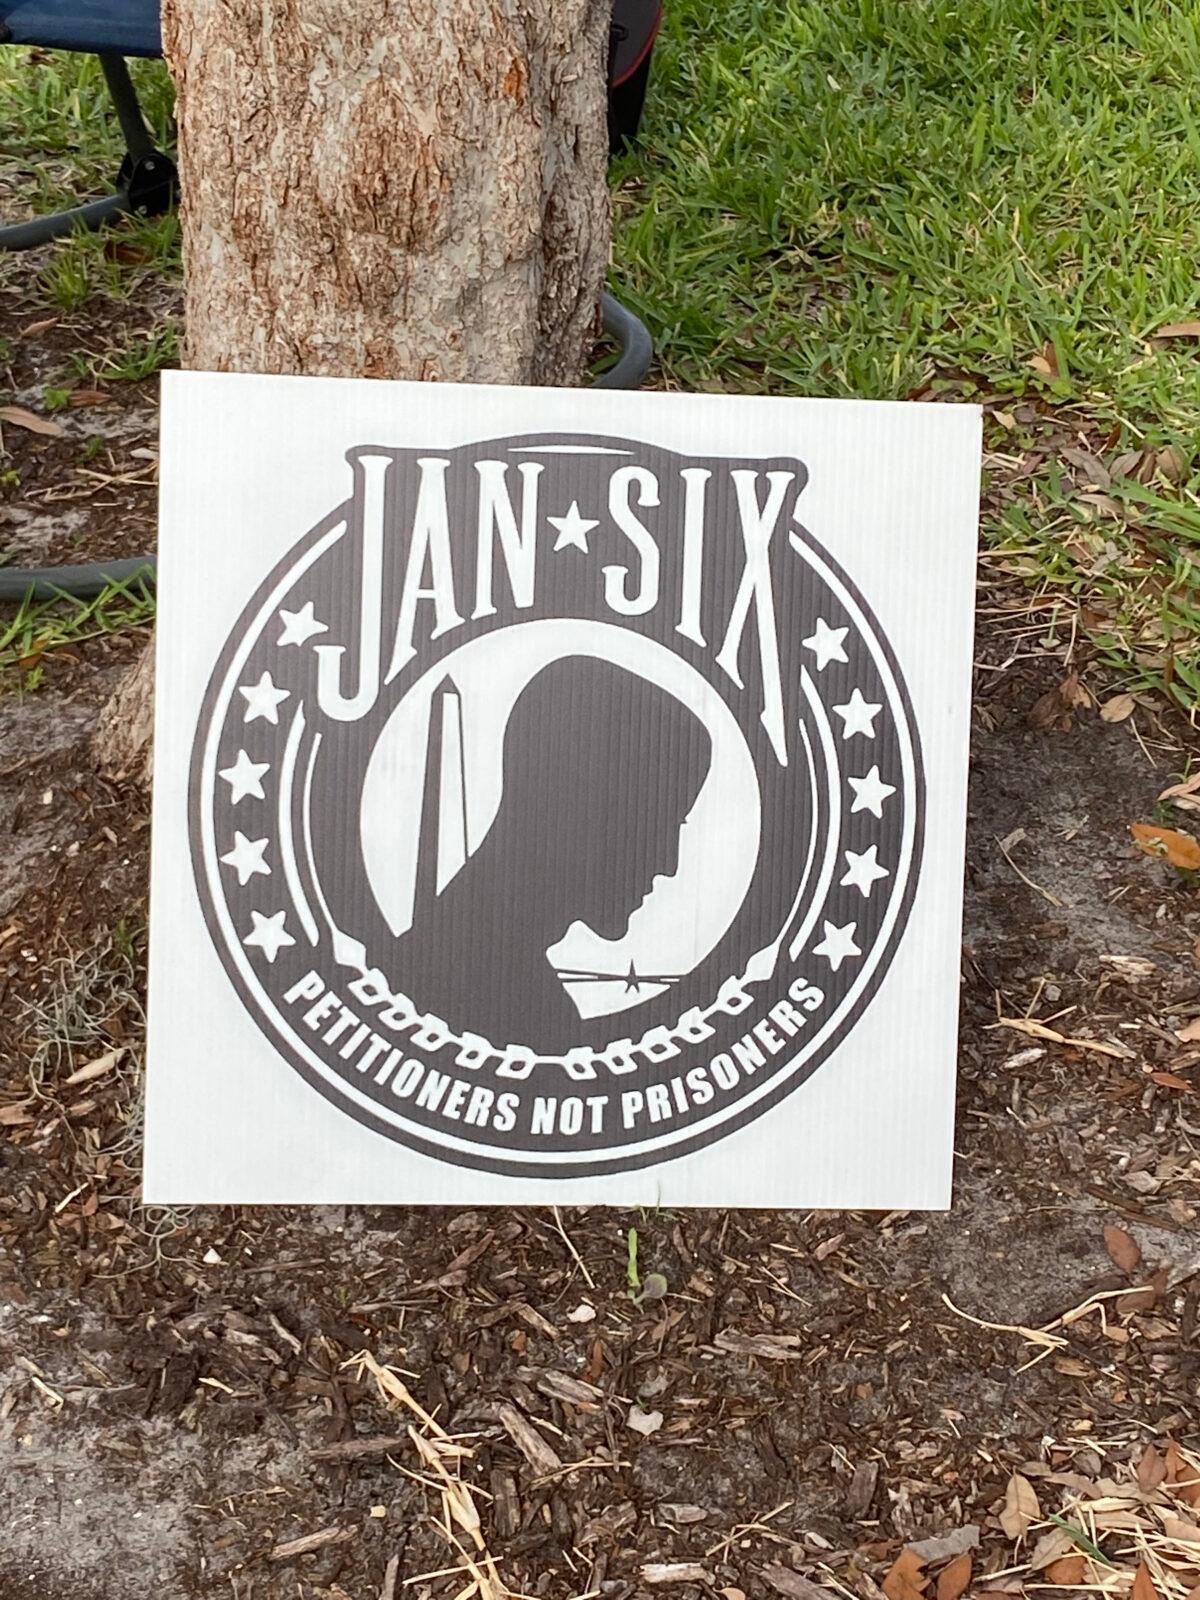 A sign bearing the "Jan-Six" logo, designed to represent the prisoners being held for their participation or simple presence at the Stop the Steal rally in Washington on Jan. 6, 2021, is spotted at a rally in Pinellas County, Fla., on May 22, 2022. (Patricia Tolson/The Epoch Times)